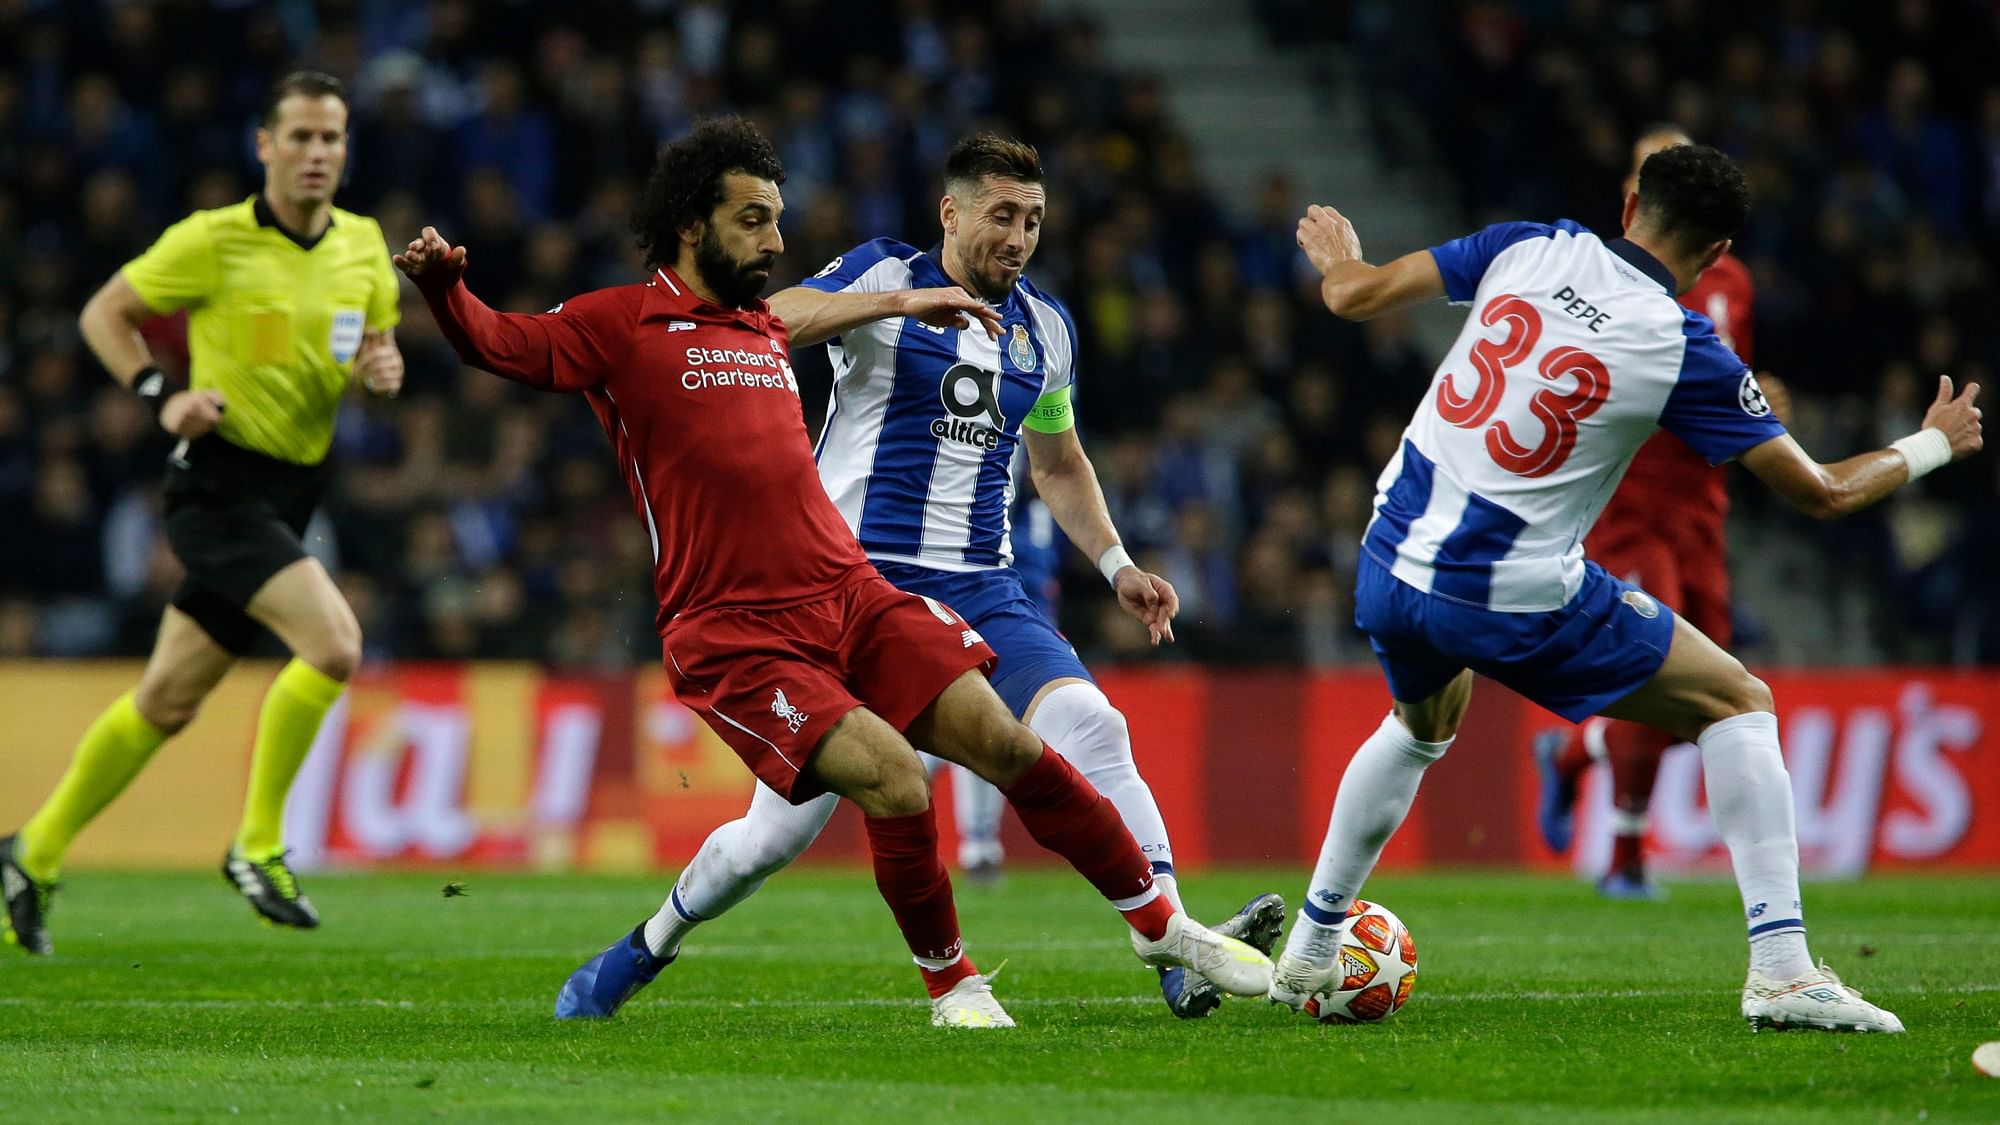 Liverpool’s Mohamed Salah, left, challenges for the ball with Porto defender Pepe, right, and Porto midfielder Hector Herrera during the Champions League quarterfinal, 2nd leg, soccer match between FC Porto and Liverpool at the Dragao stadium in Porto.